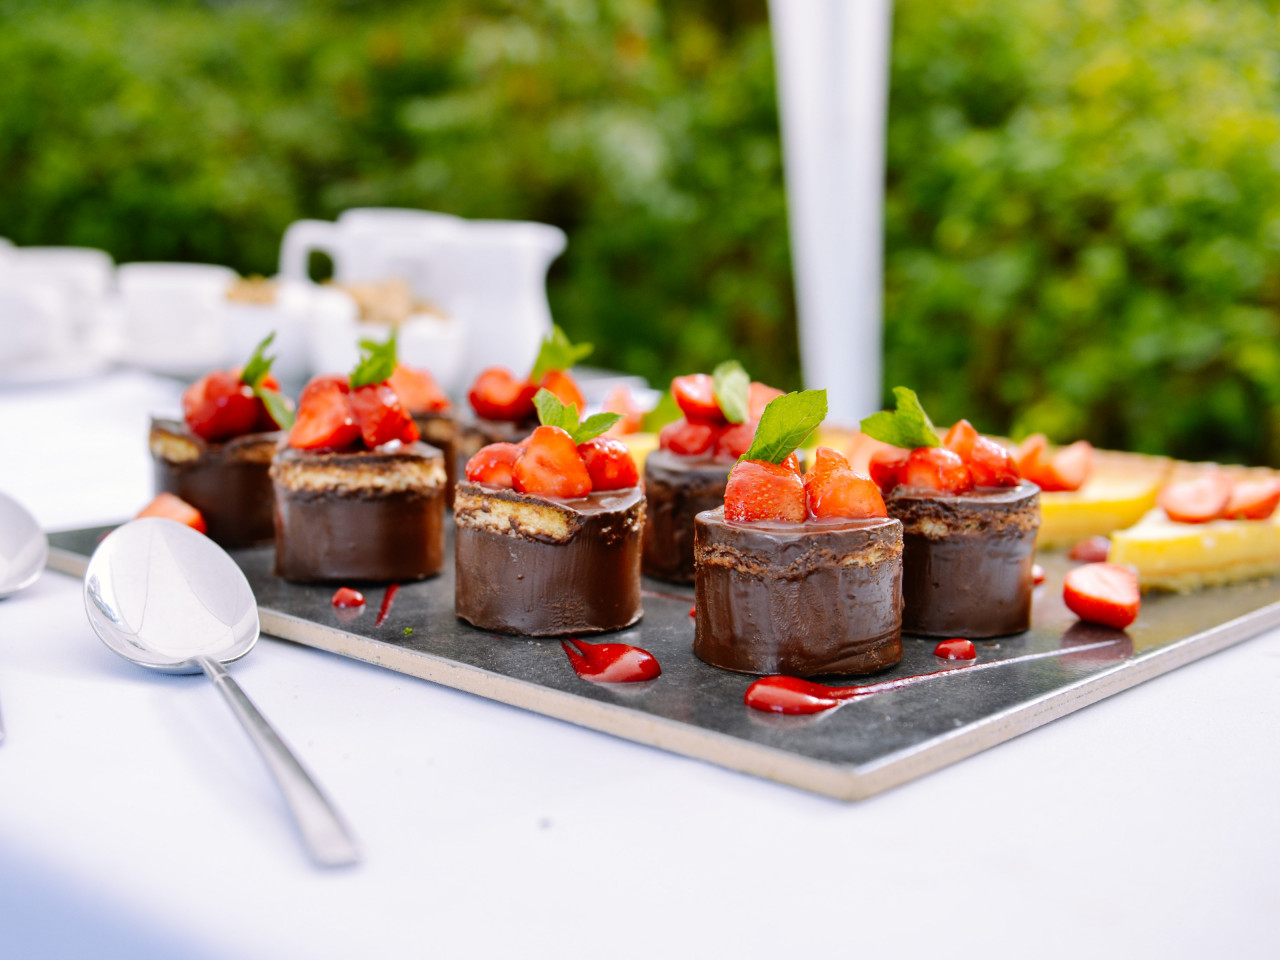 Chocolate cakes with strawberries wallpaper 1280x960